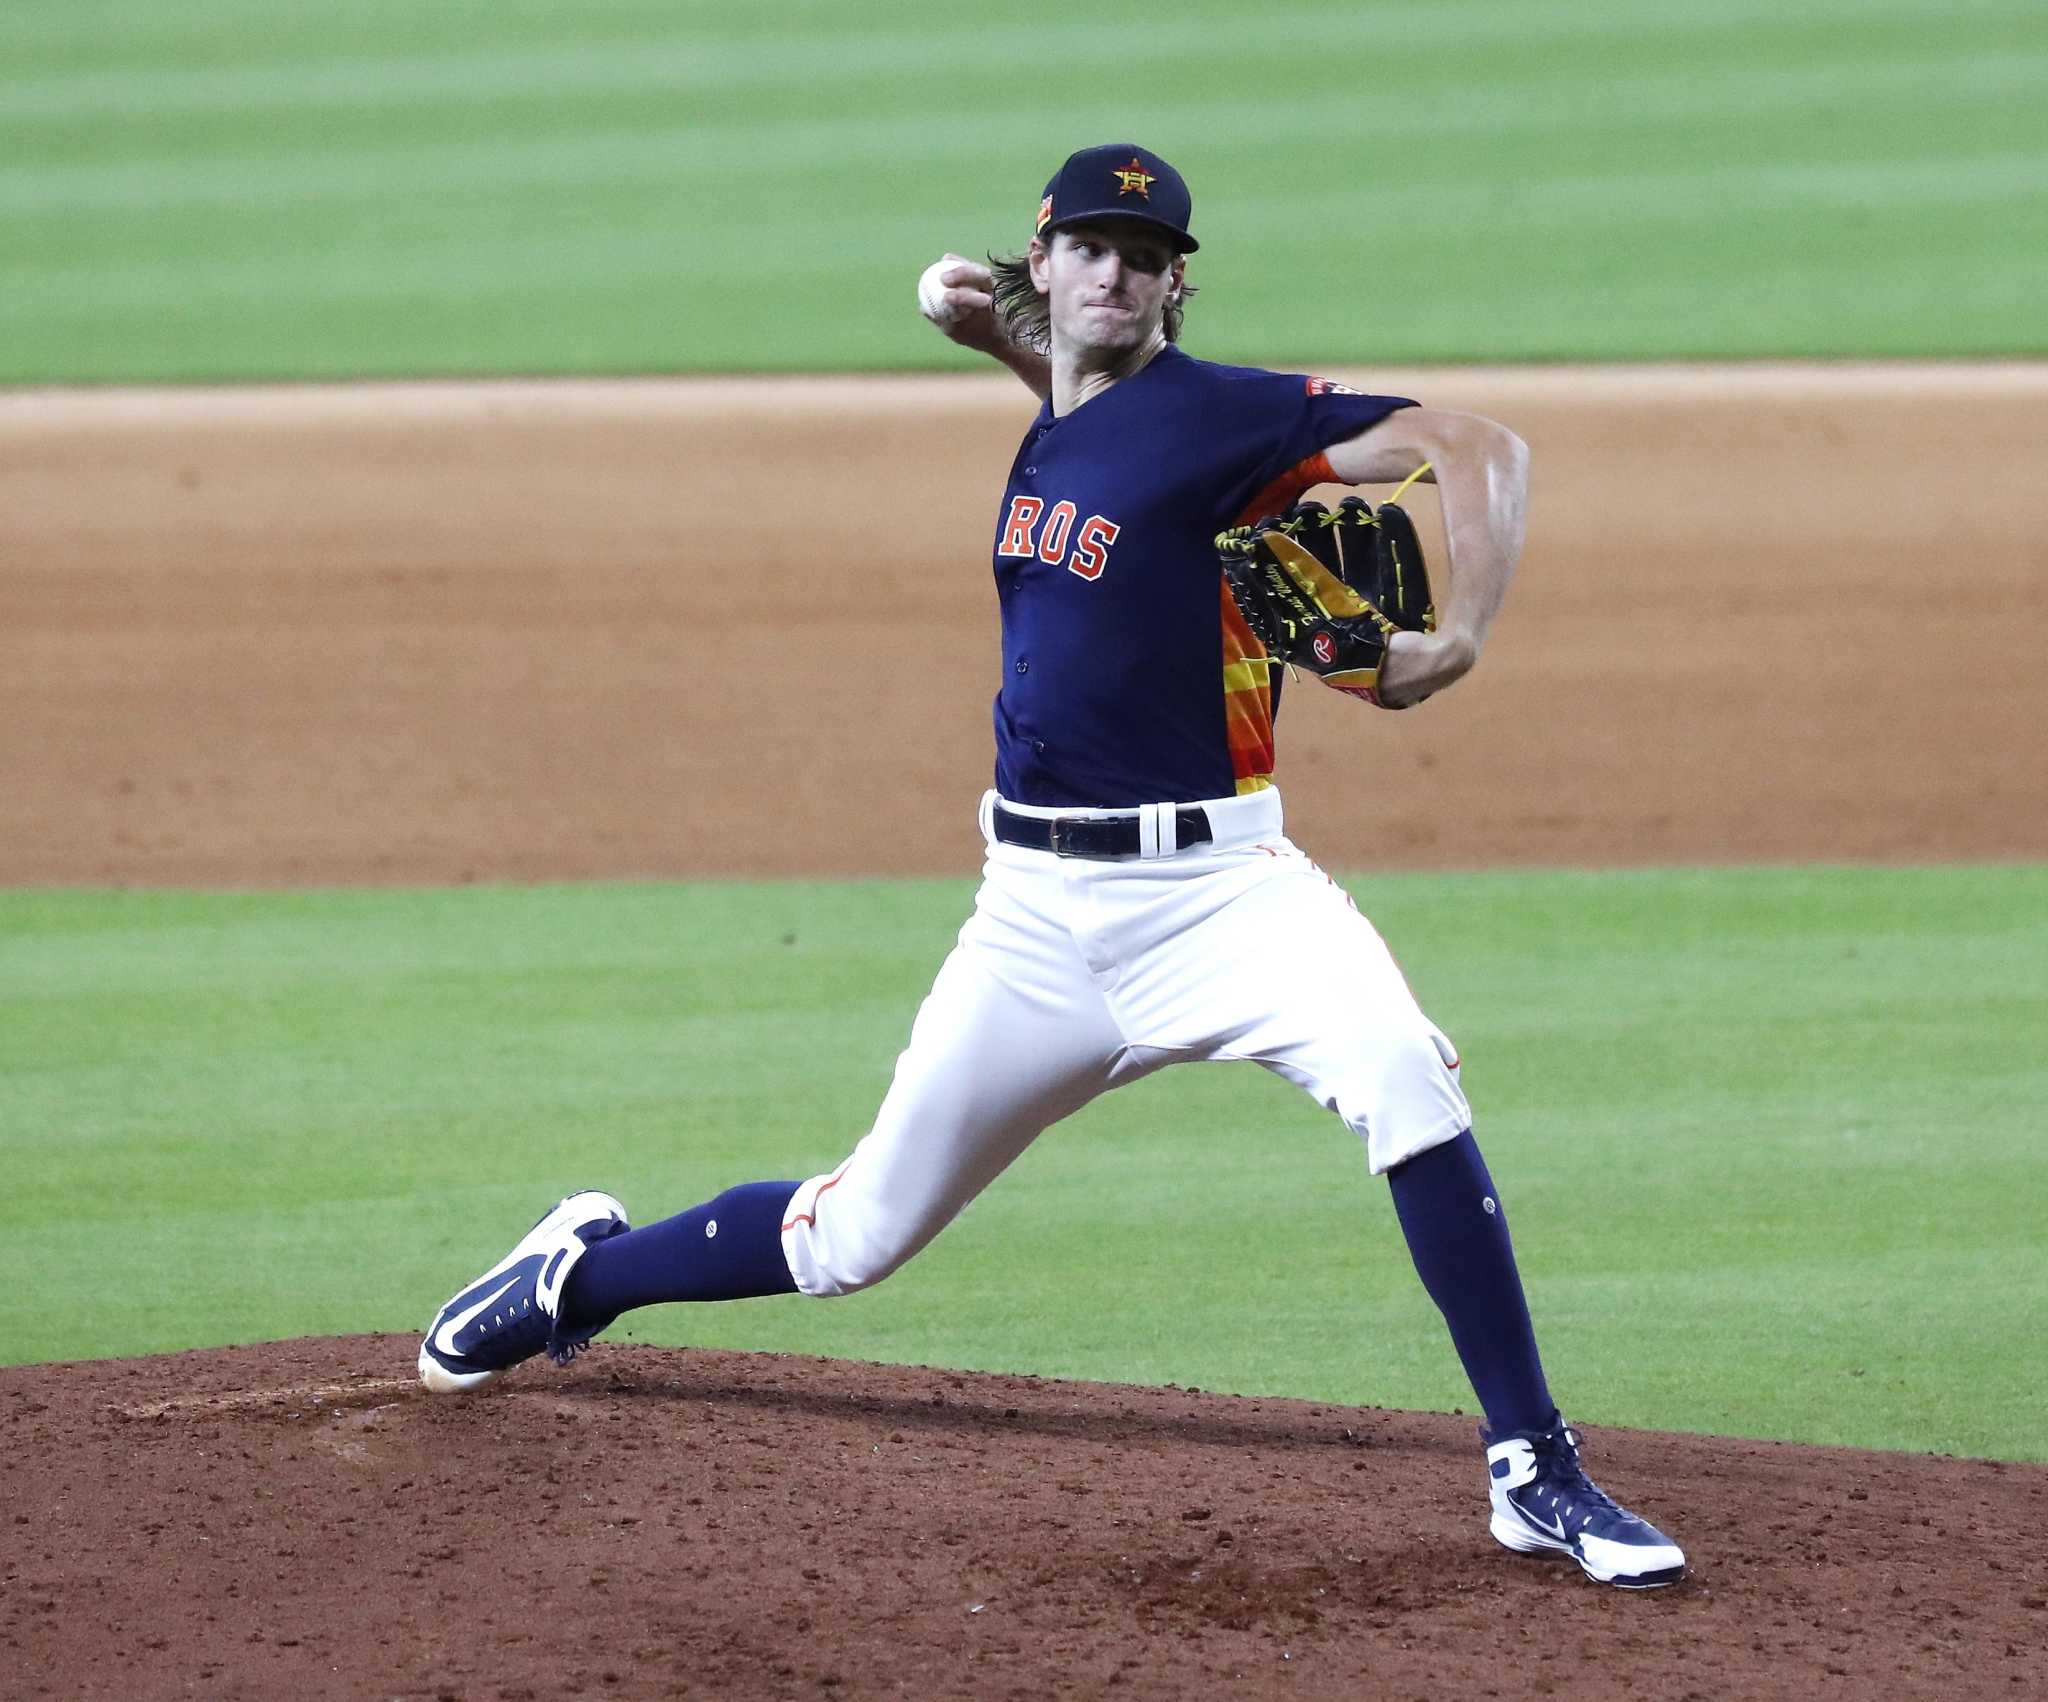 This is a 2020 photo of Forrest Whitley of the Houston Astros